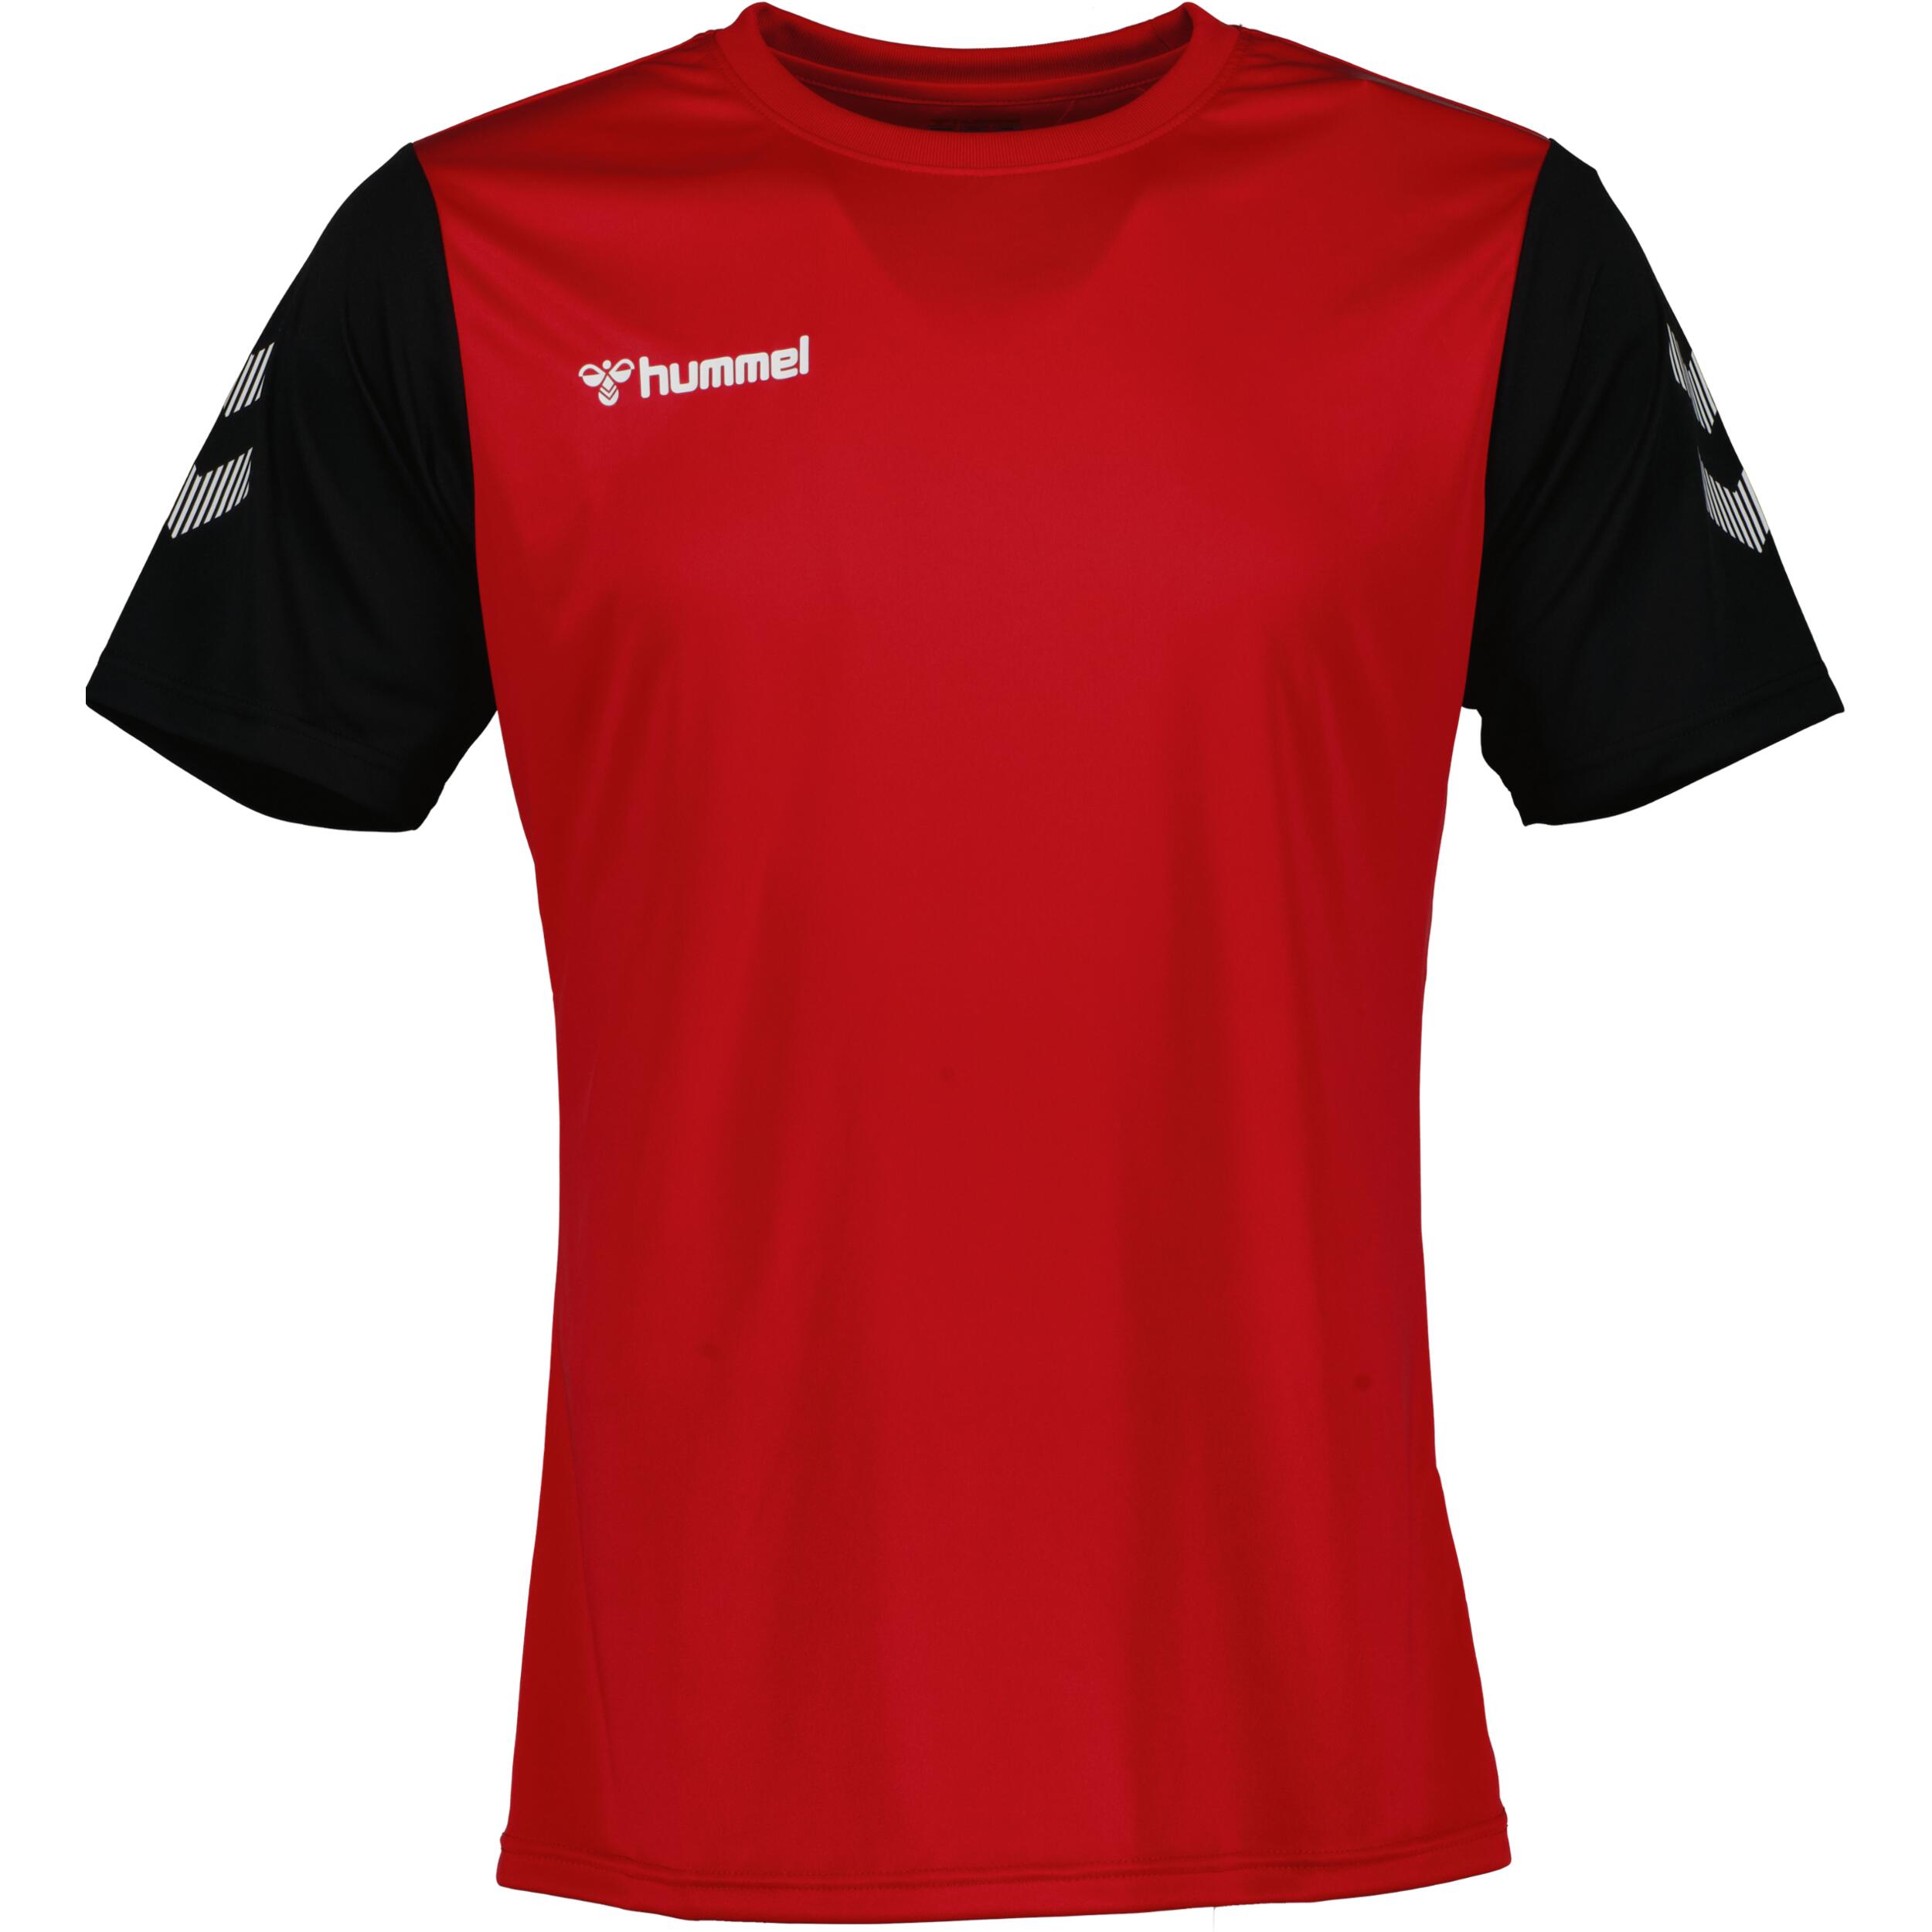 Match jersey for kids, great for football, in red/black 1/3